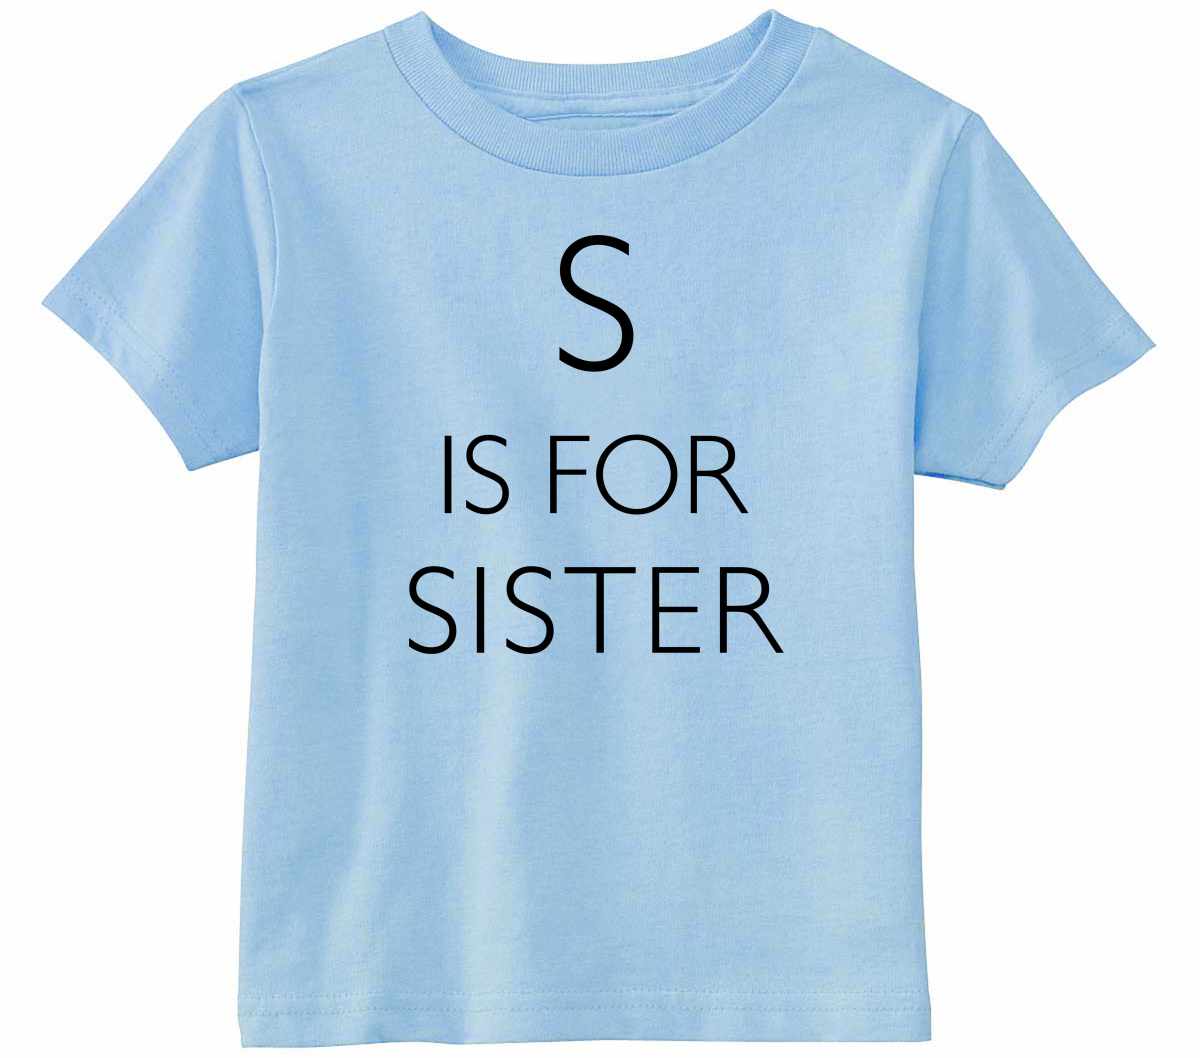 S is for Sister Infant/Toddler  (#1159-7)